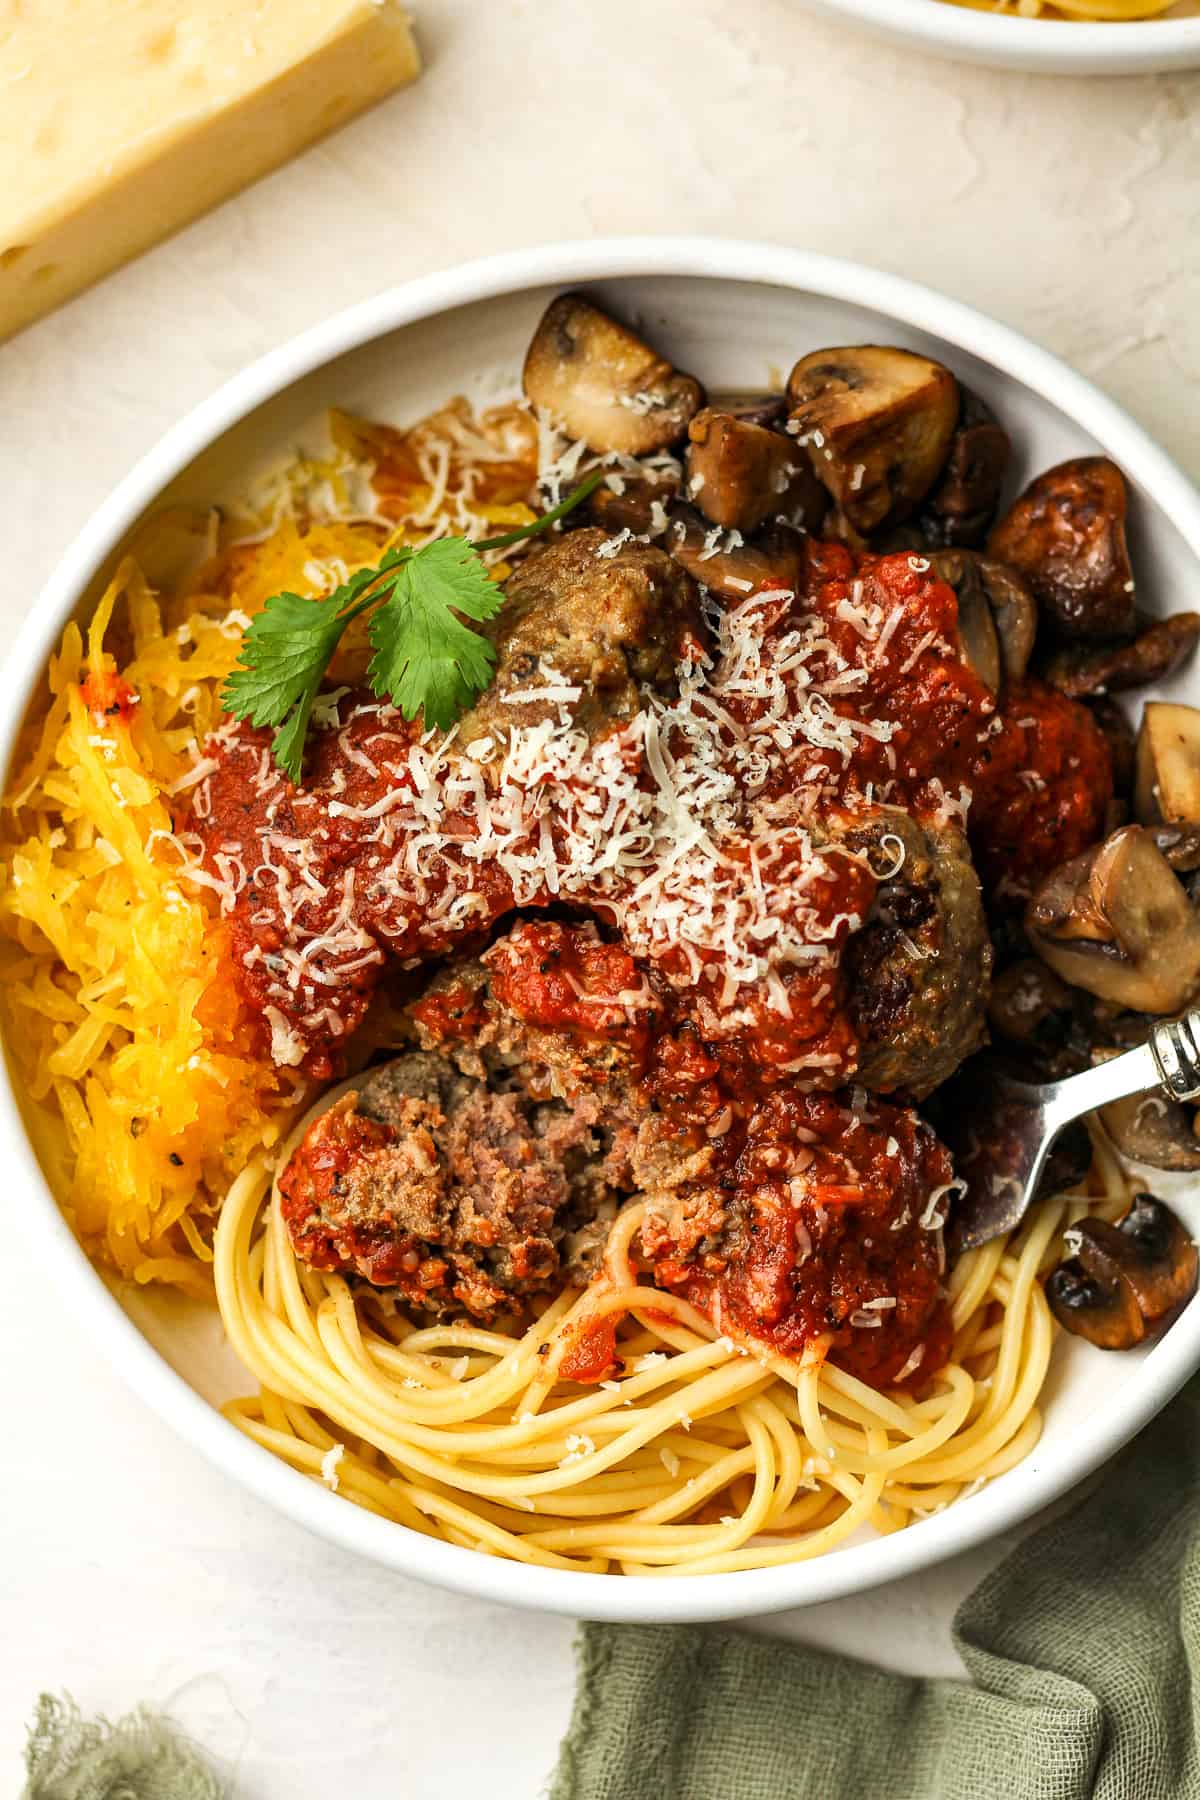 Overhead view of a bowl of meatballs with marinara and a bite out of a meatball.